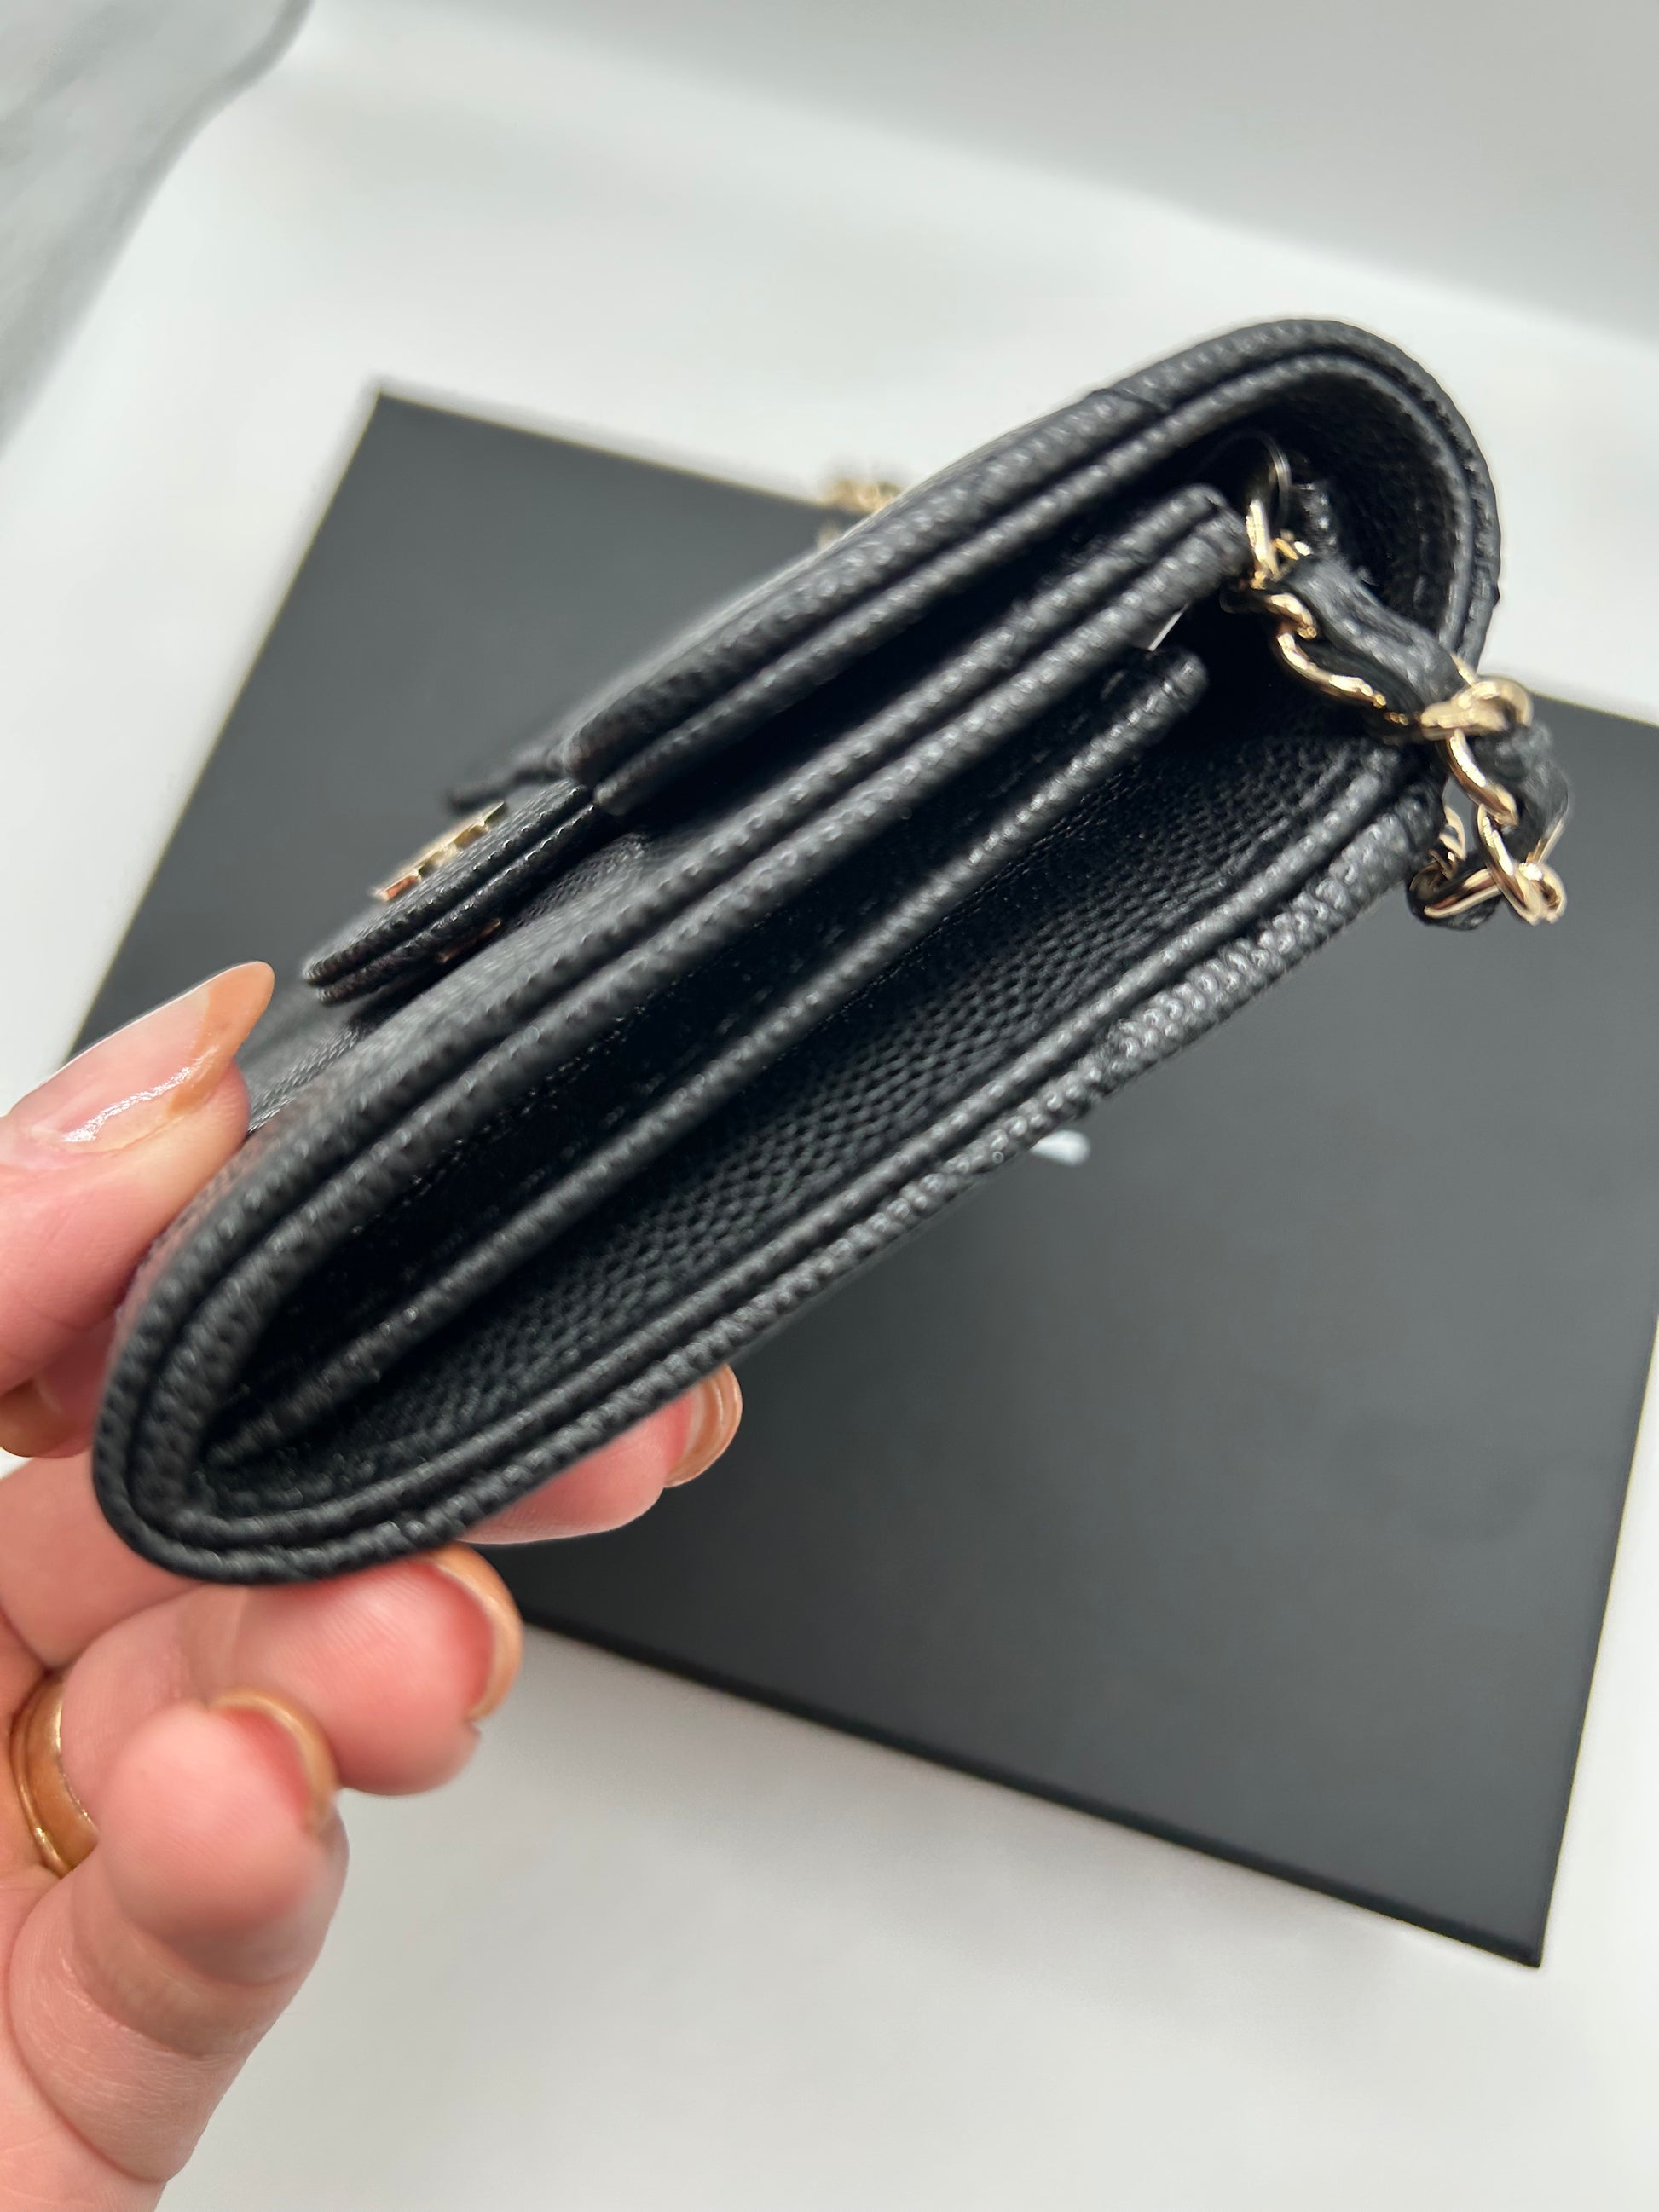 Chanel Classic Small Zipped Card Coin Purse Wallet in Black Caviar with  Gold Hardware - SOLD